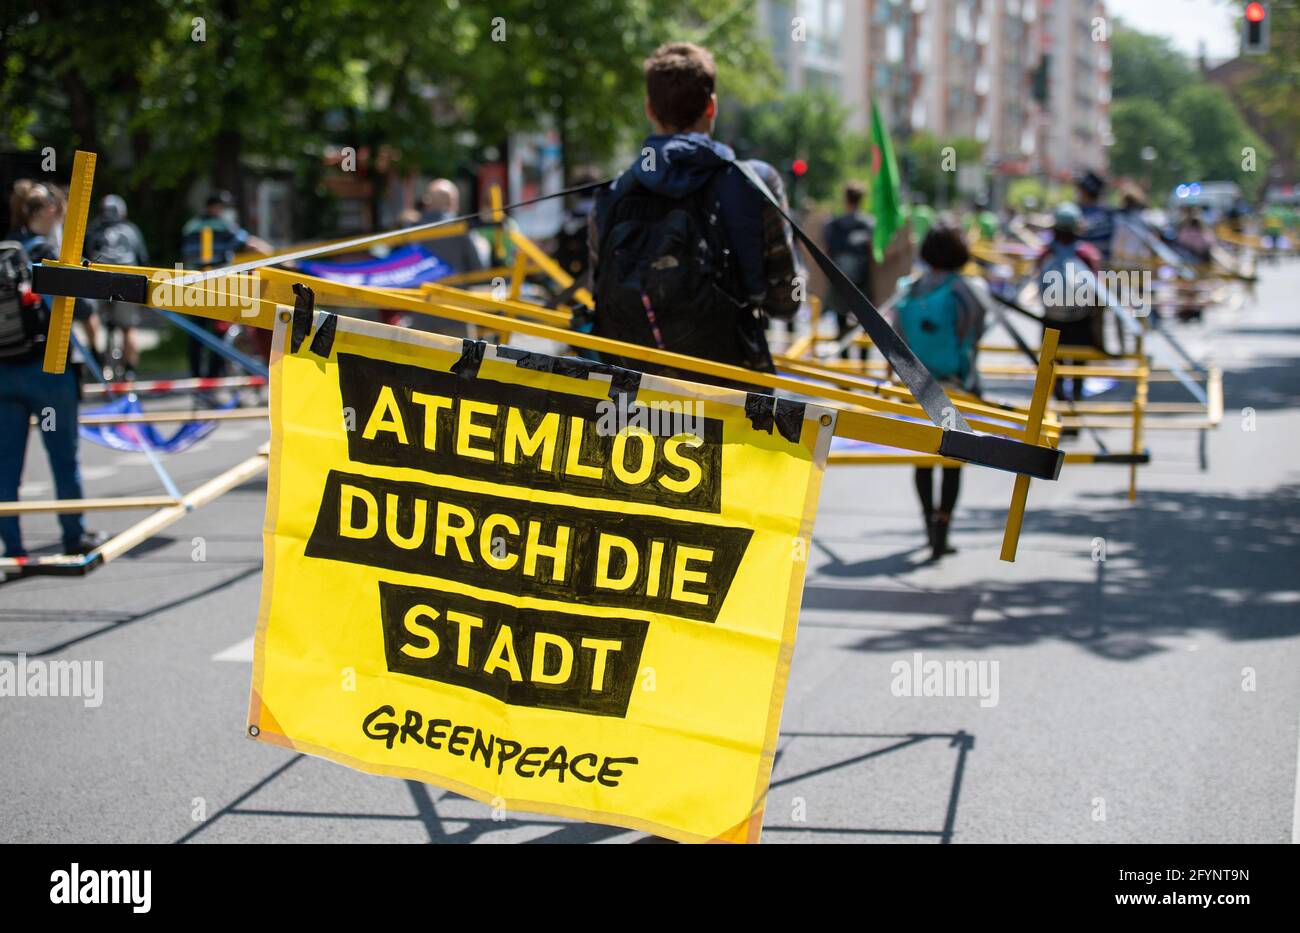 Berlin, Germany. 29th May, 2021. A participant carries a banner with the inscription 'Atemlos durch die Stadt' (Breathless through the city) during an action of 'Volksentscheid Berlin autofrei' and Greenpeace Berlin. During the action, wooden racks, which are supposed to represent the average space consumption of cars, are used to demonstrate against the consumption of space by cars. Credit: Christophe Gateau/dpa/Alamy Live News Stock Photo